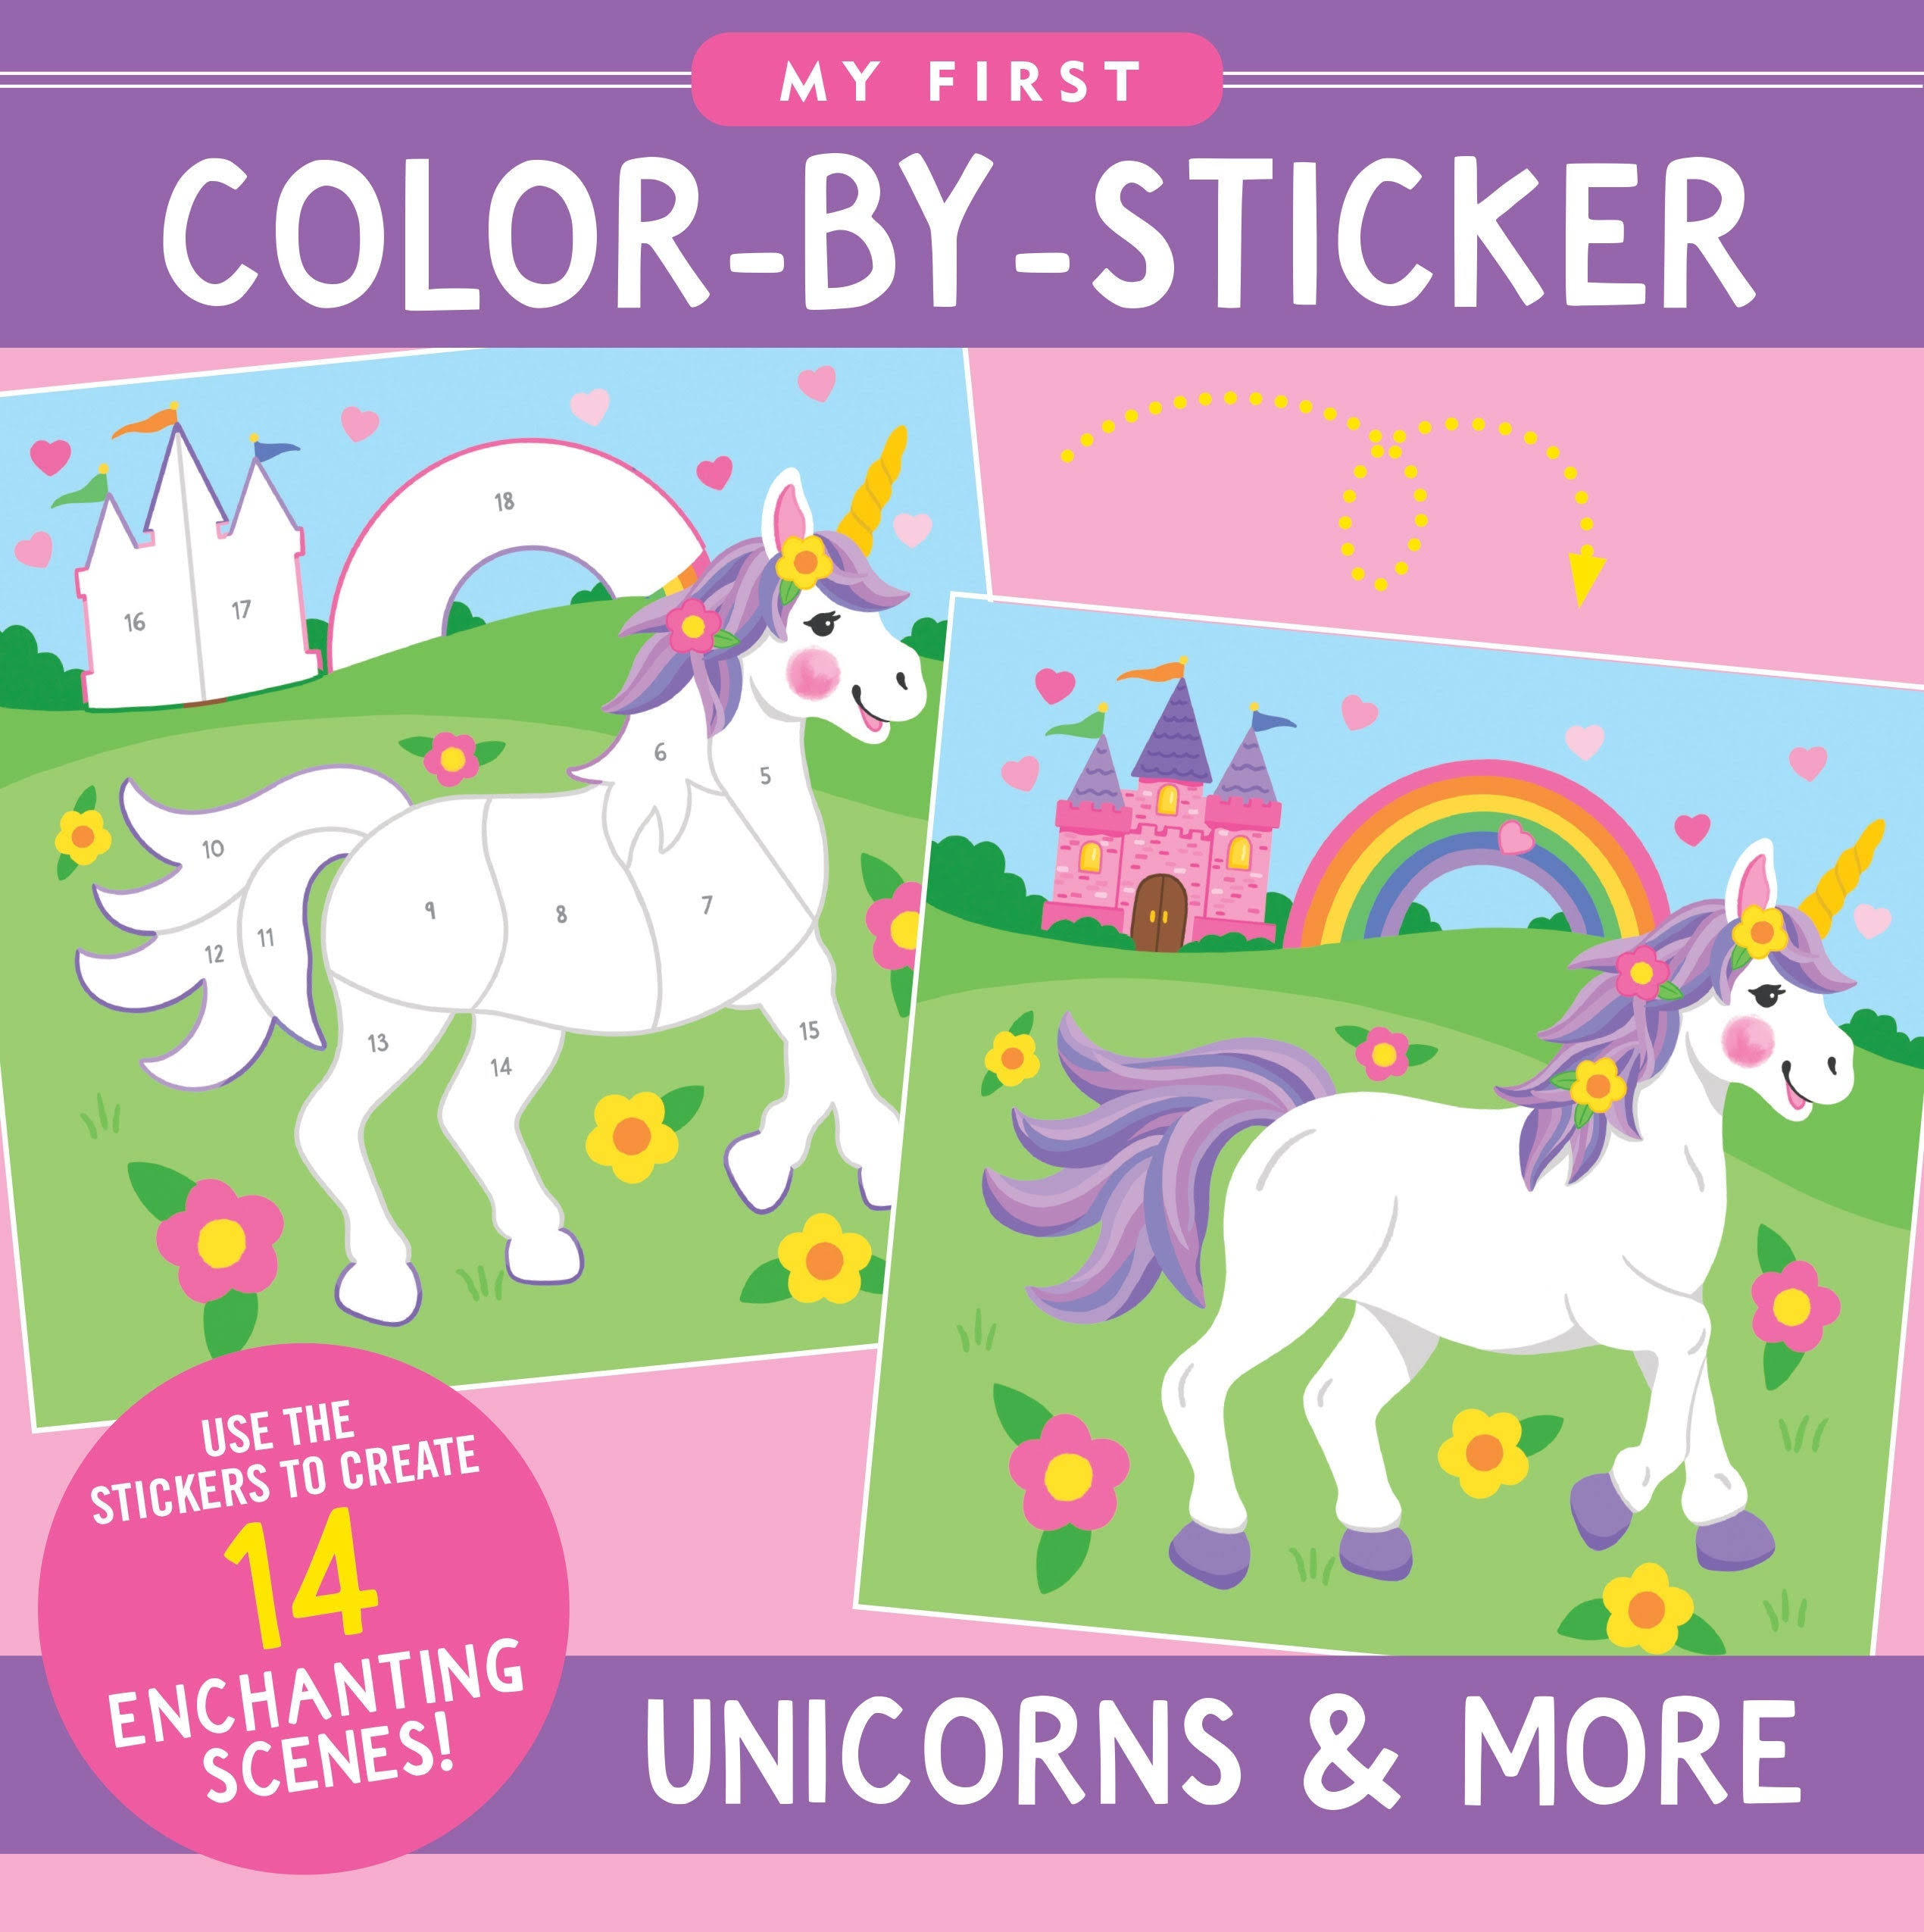 My First Color-by-Sticker Book - Unicorns & More